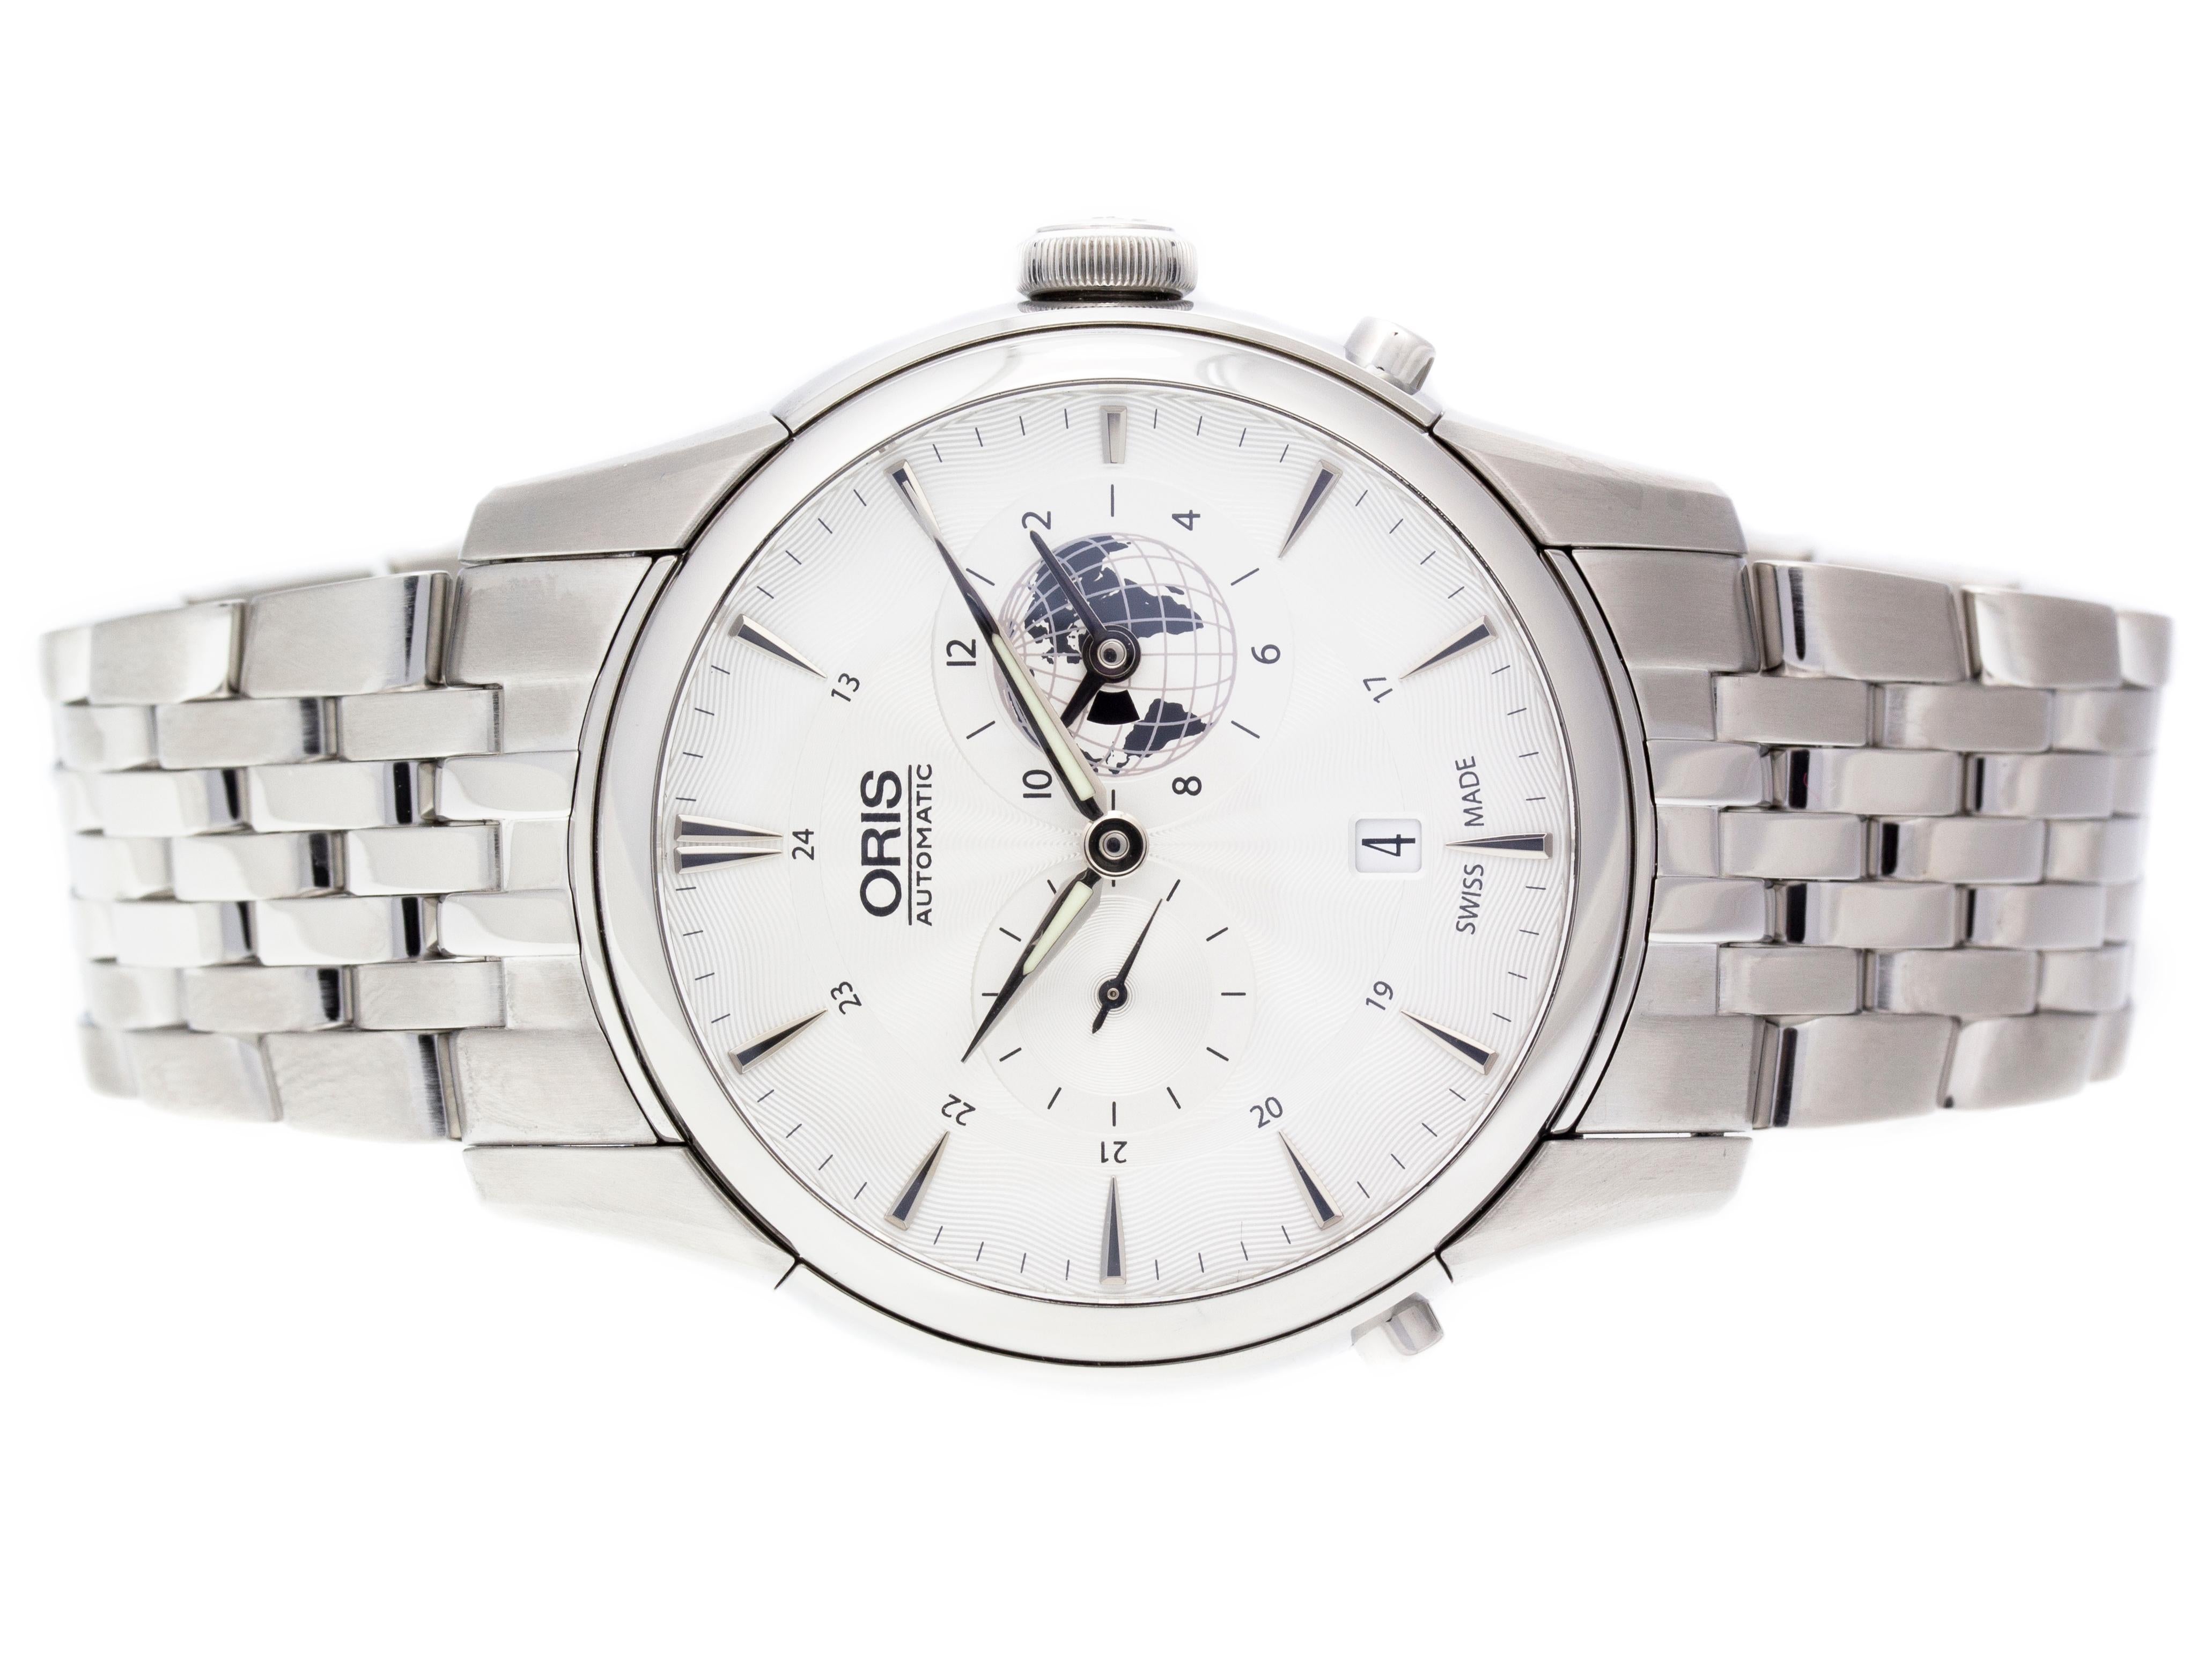 Stainless Steel Oris Artelier Greenwich Mean Time Limited Edition Automatic Watch with a 42mm case, White dial, and Stainless Steel Bracelet with Deployment Buckle. Features include Hours, Minutes, and Date at 6 o'clock, and Dual Time Zone. Water